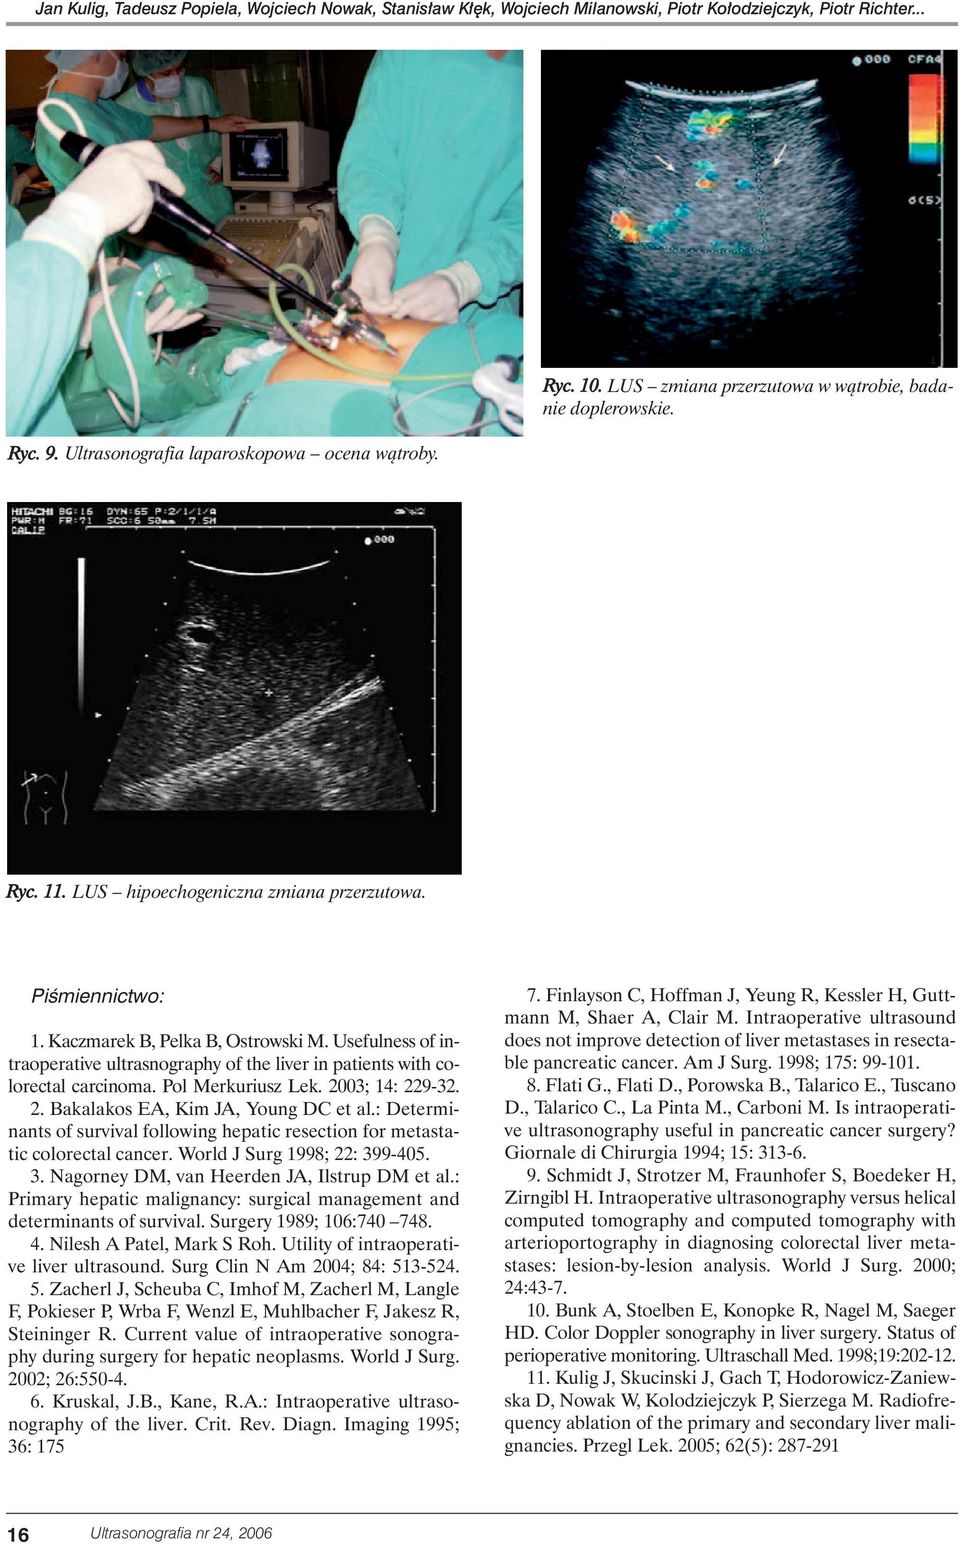 Usefulness of intraoperative ultrasnography of the liver in patients with colorectal carcinoma. Pol Merkuriusz Lek. 2003; 14: 229-32. 2. Bakalakos EA, Kim JA, Young DC et al.